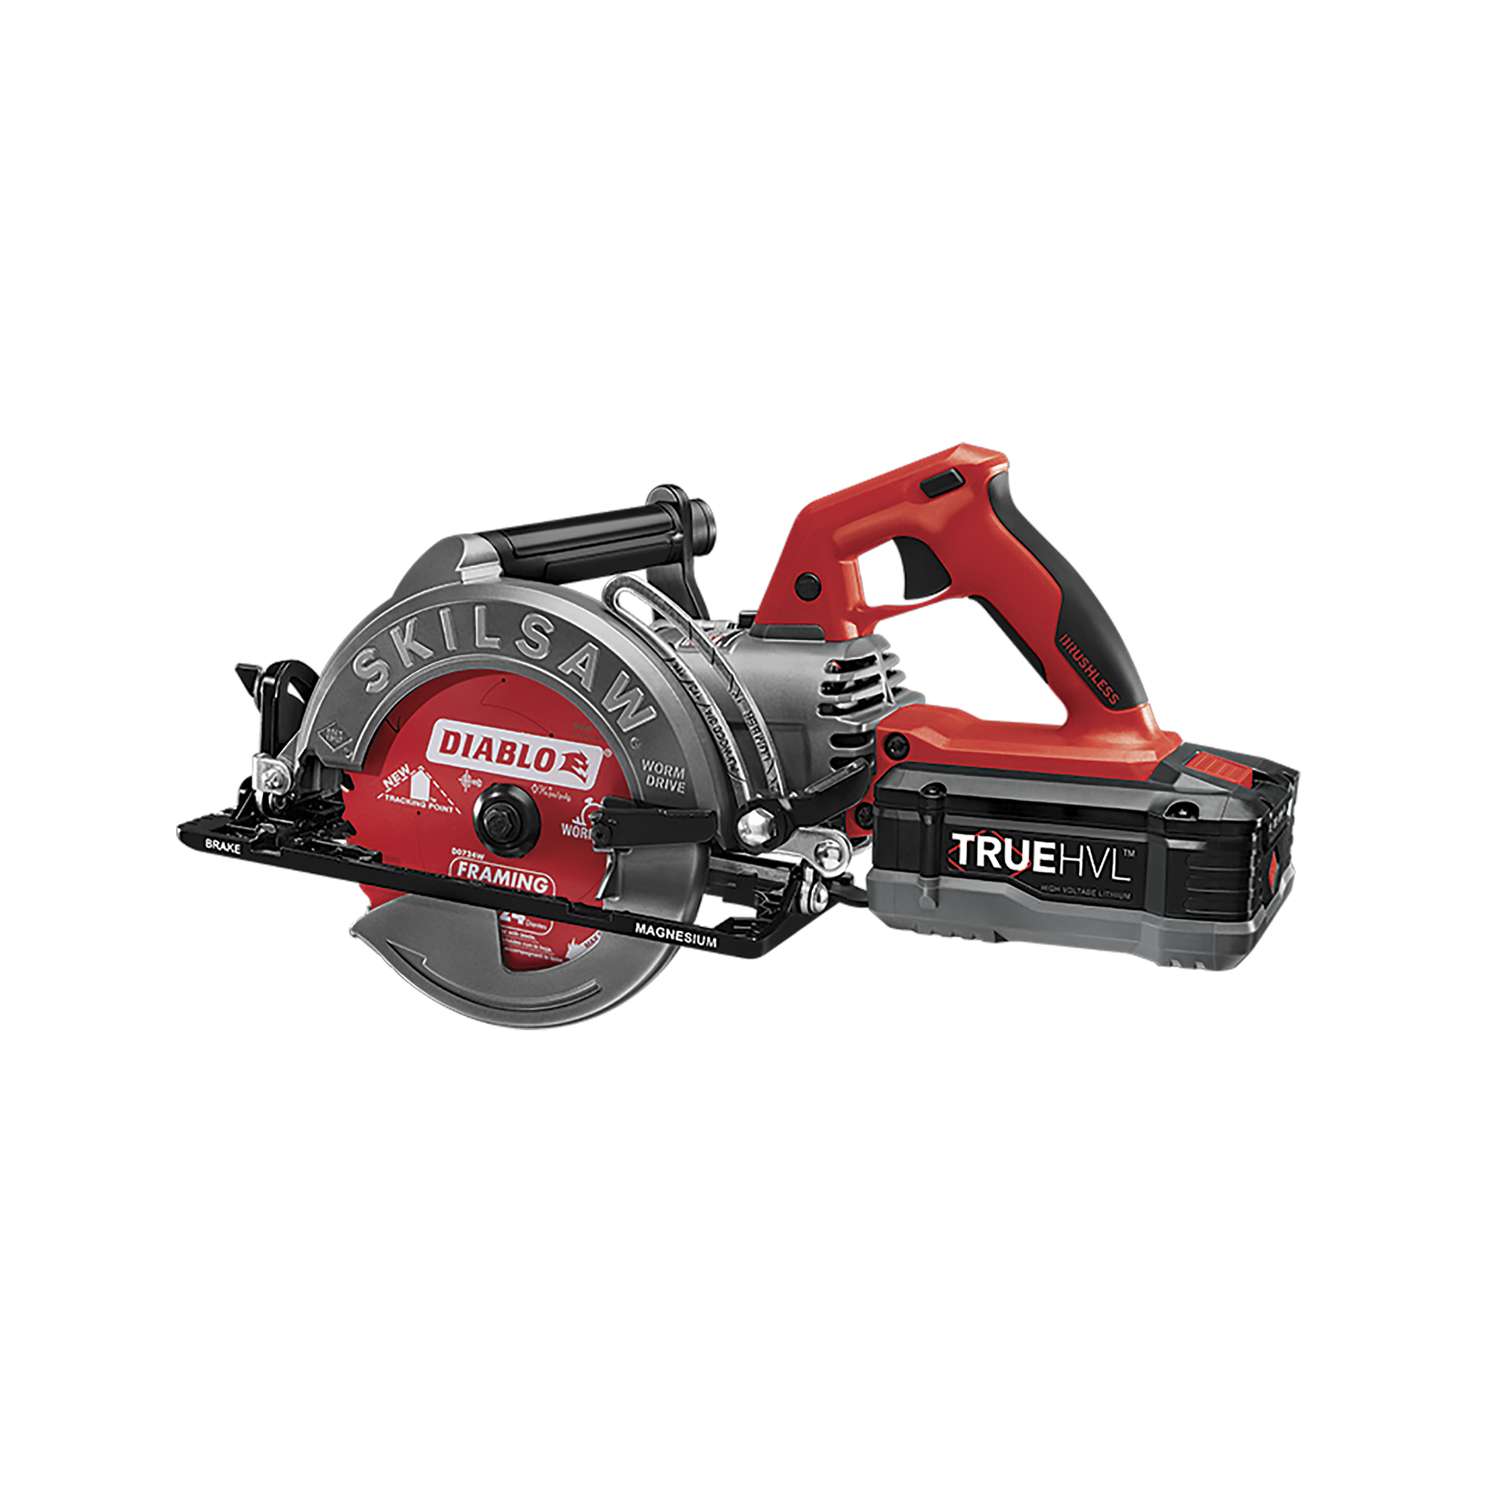 SKIL 48V 7-1/4 in. Cordless Brushless Worm Drive Circular Saw Kit (Battery   Charger) Ace Hardware